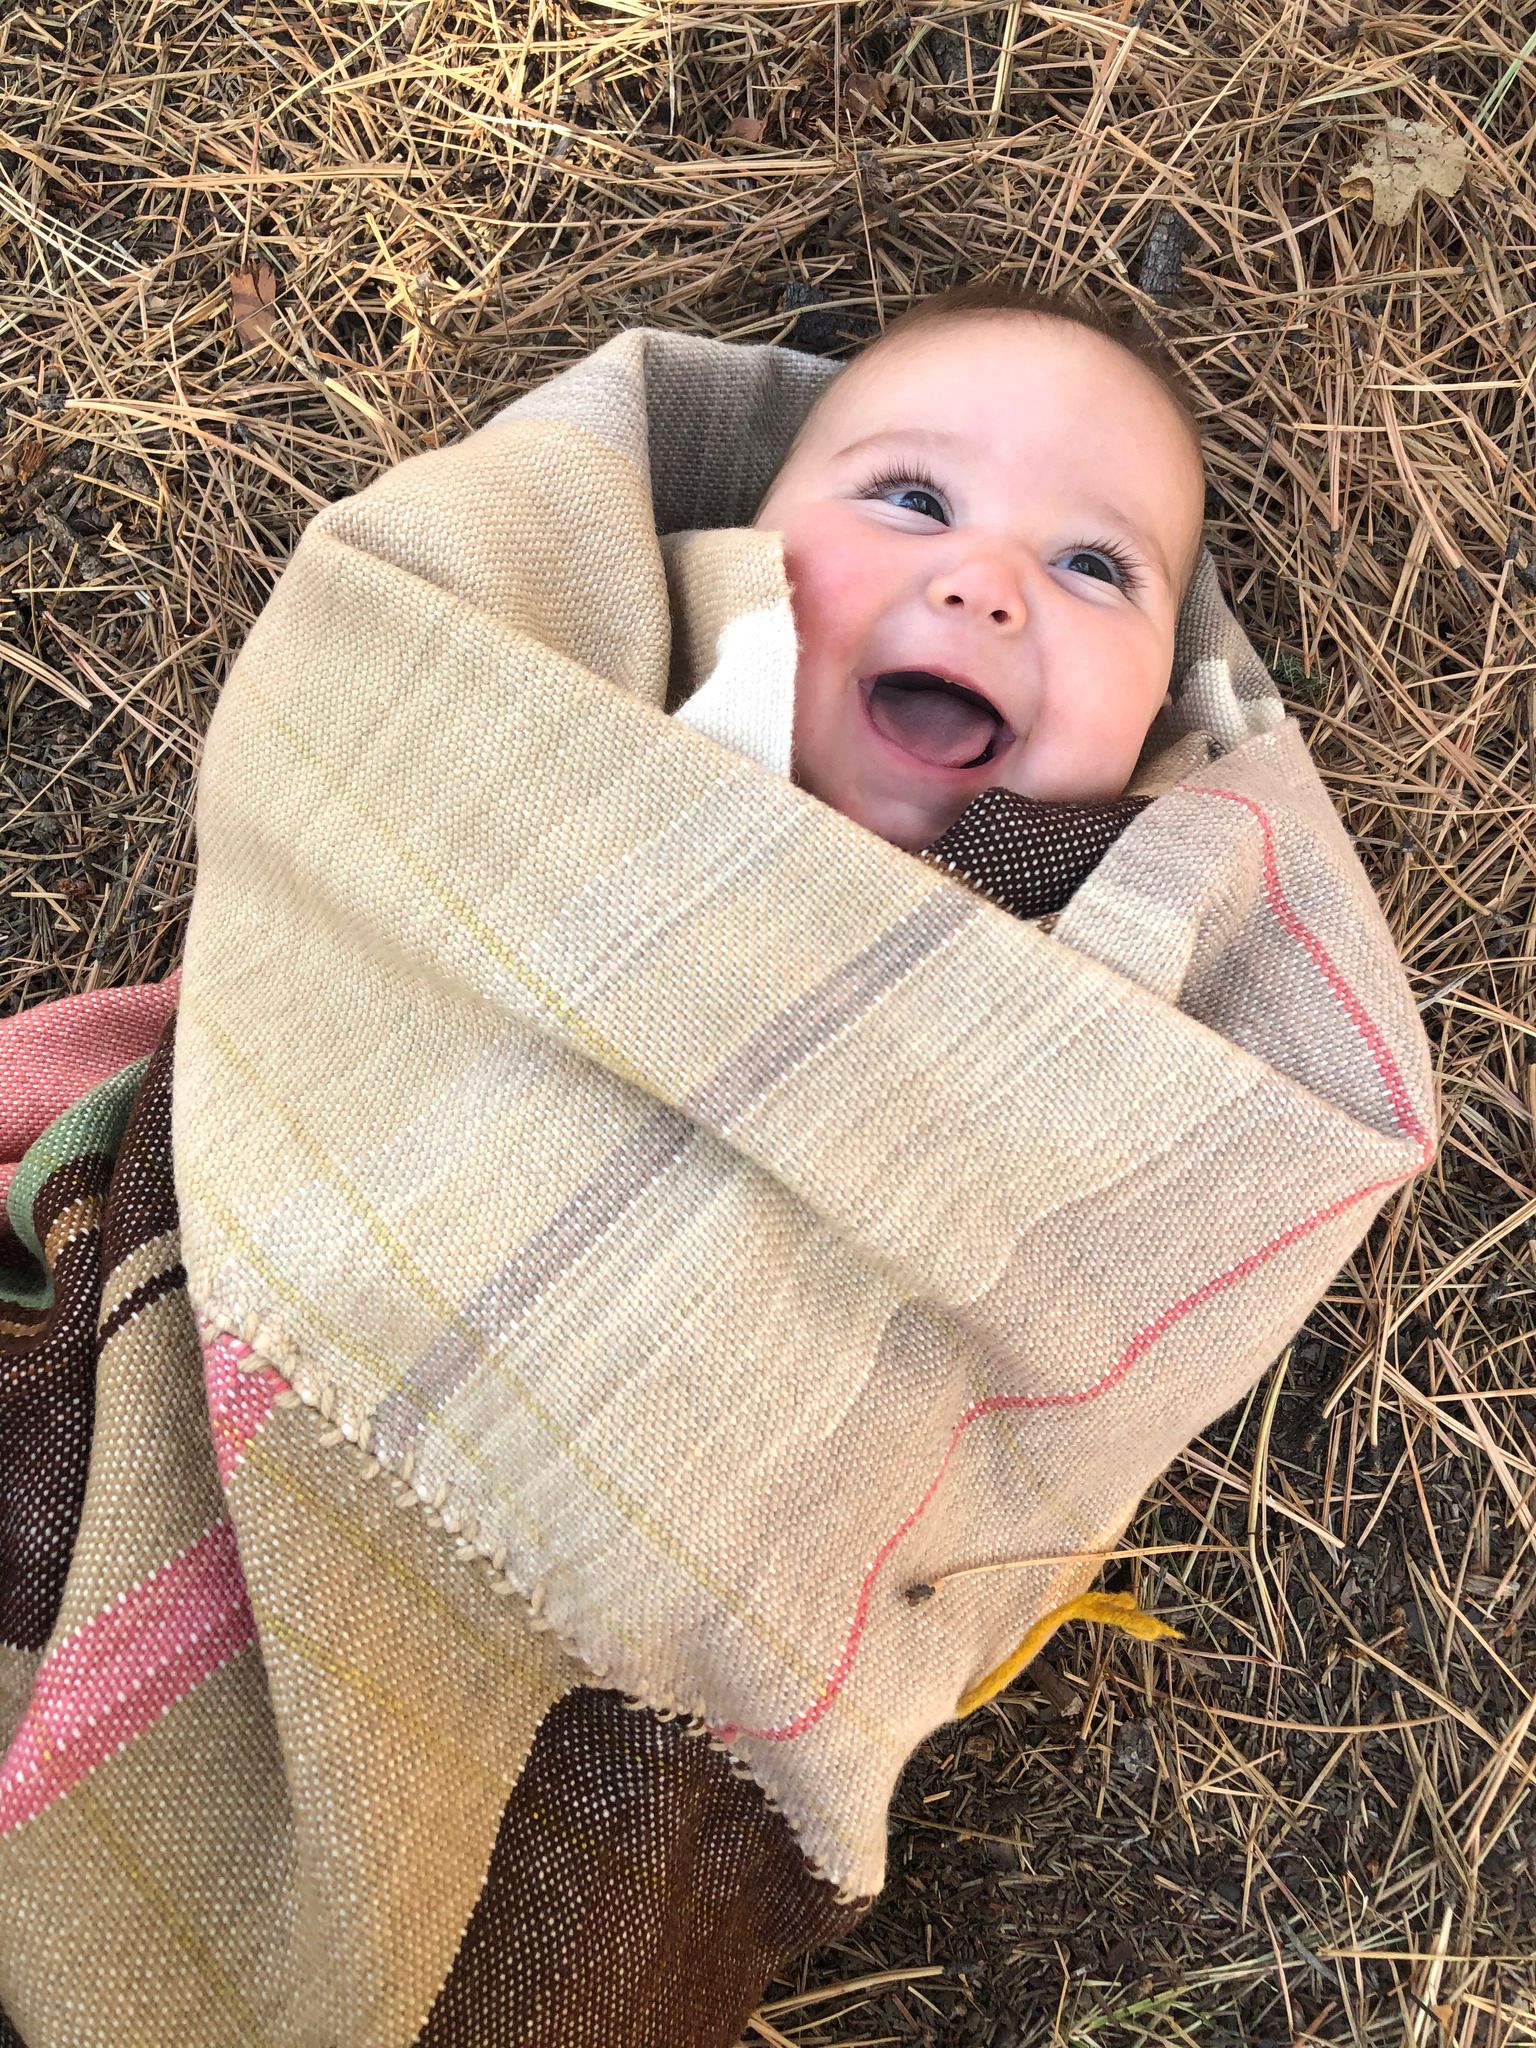 Baby wrapped in Handwoven Naturally Dyed Merino Blanket in the desert